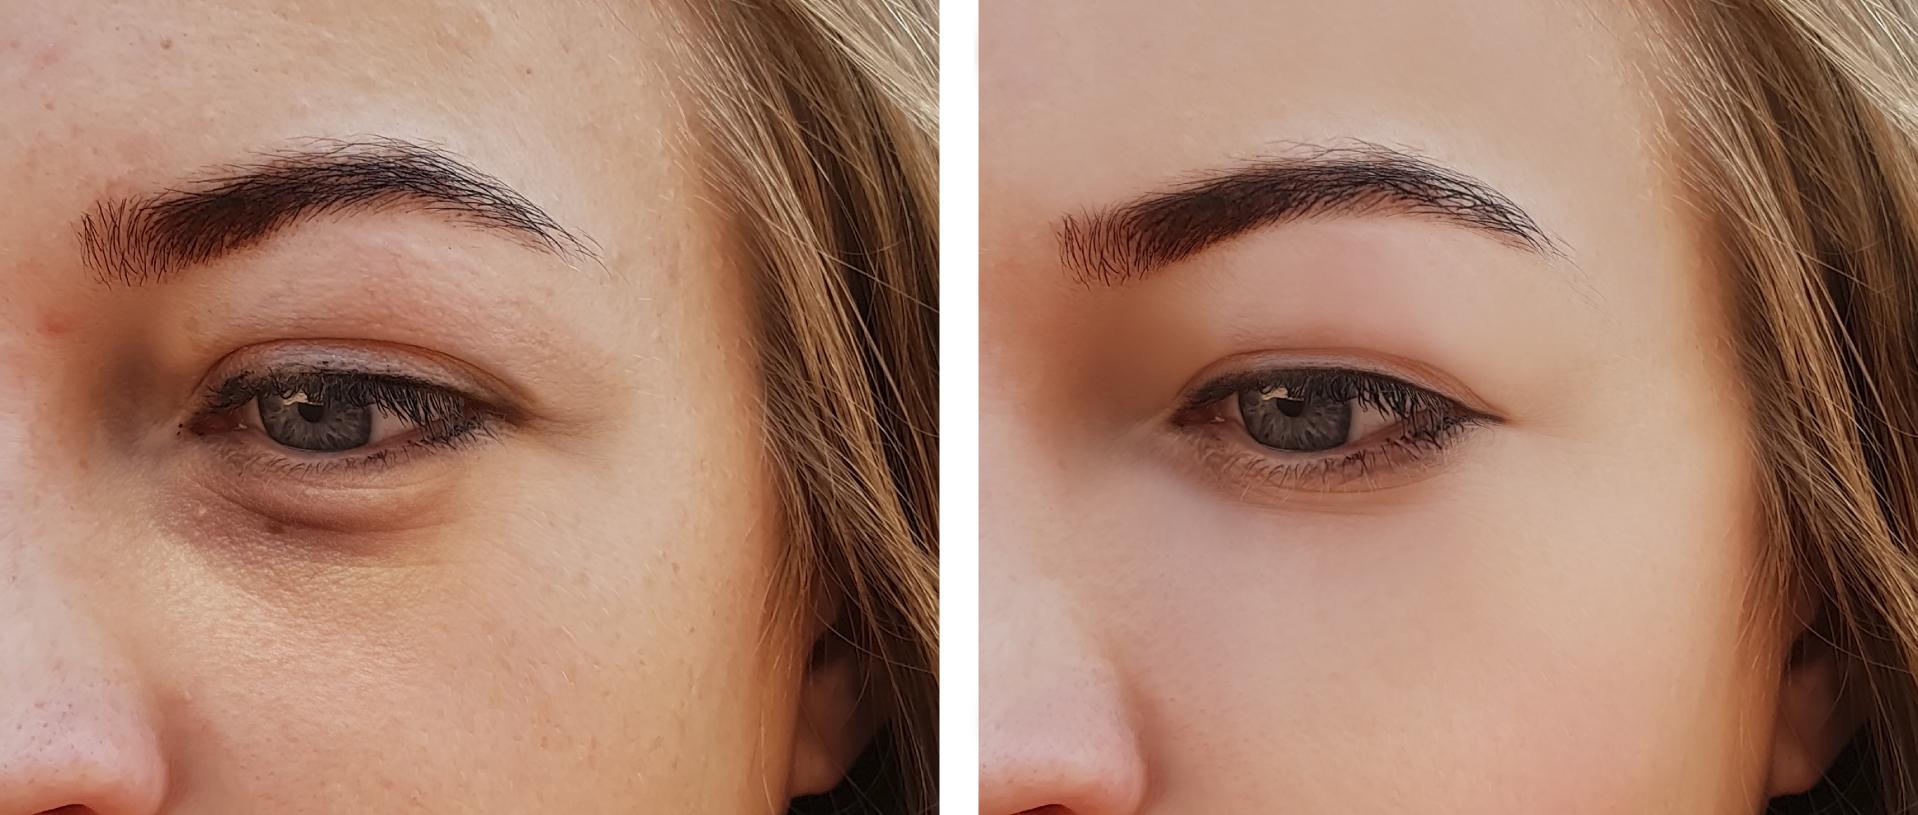 under the eyes before and after cosmetic procedures